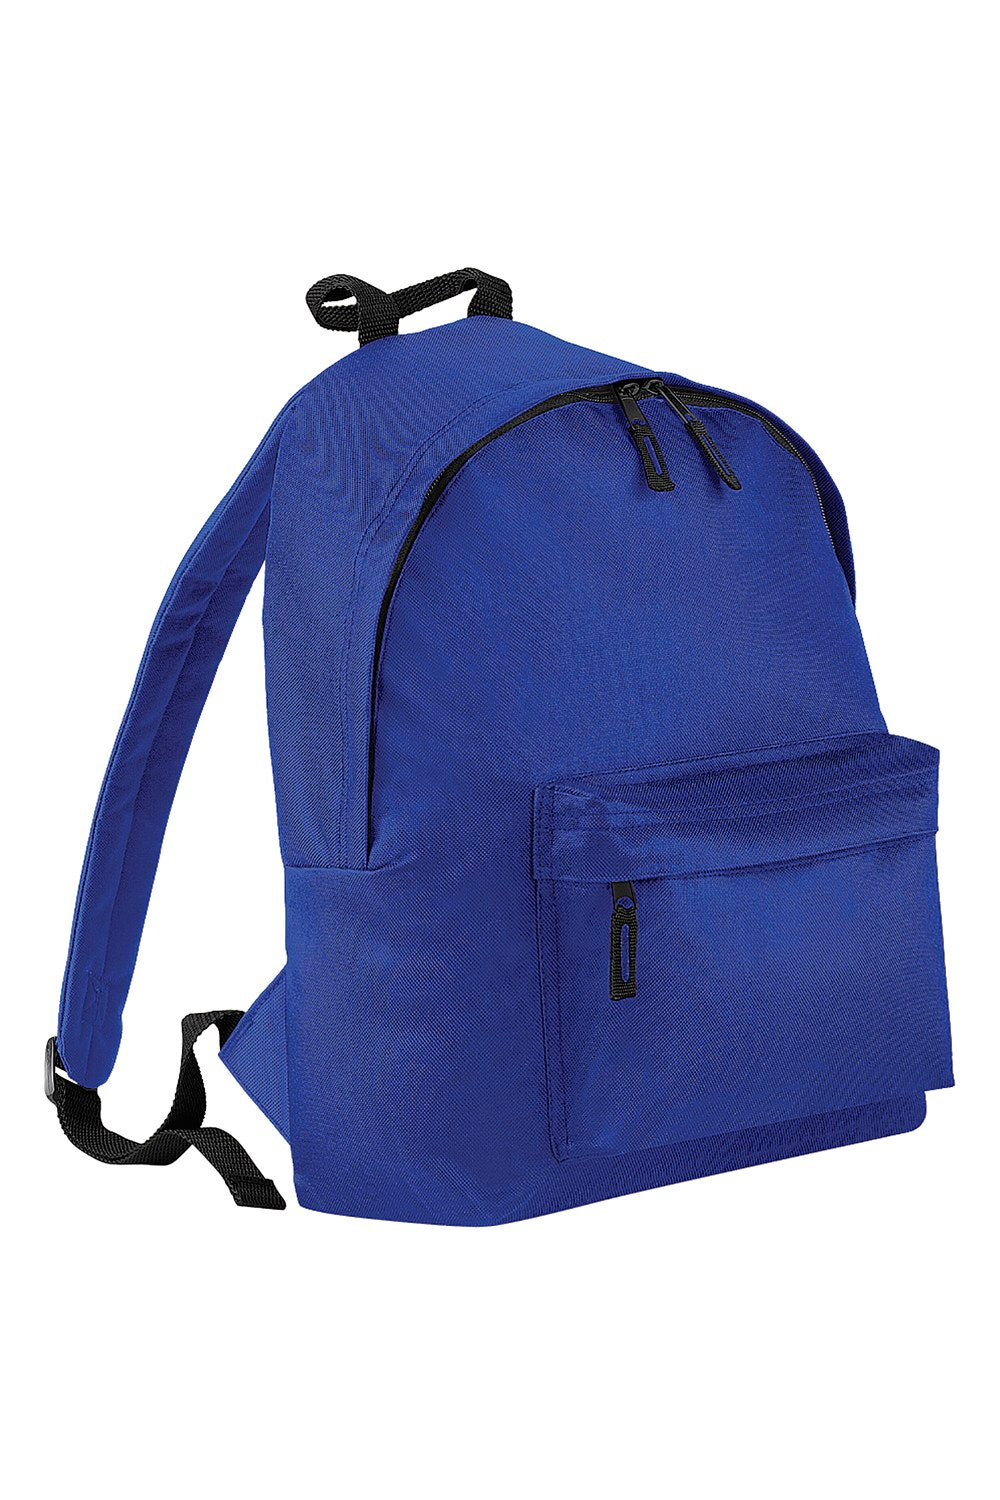 Fashion Backpack / Rucksack (18 Liters) (Pack of 2) (Bright Royal)